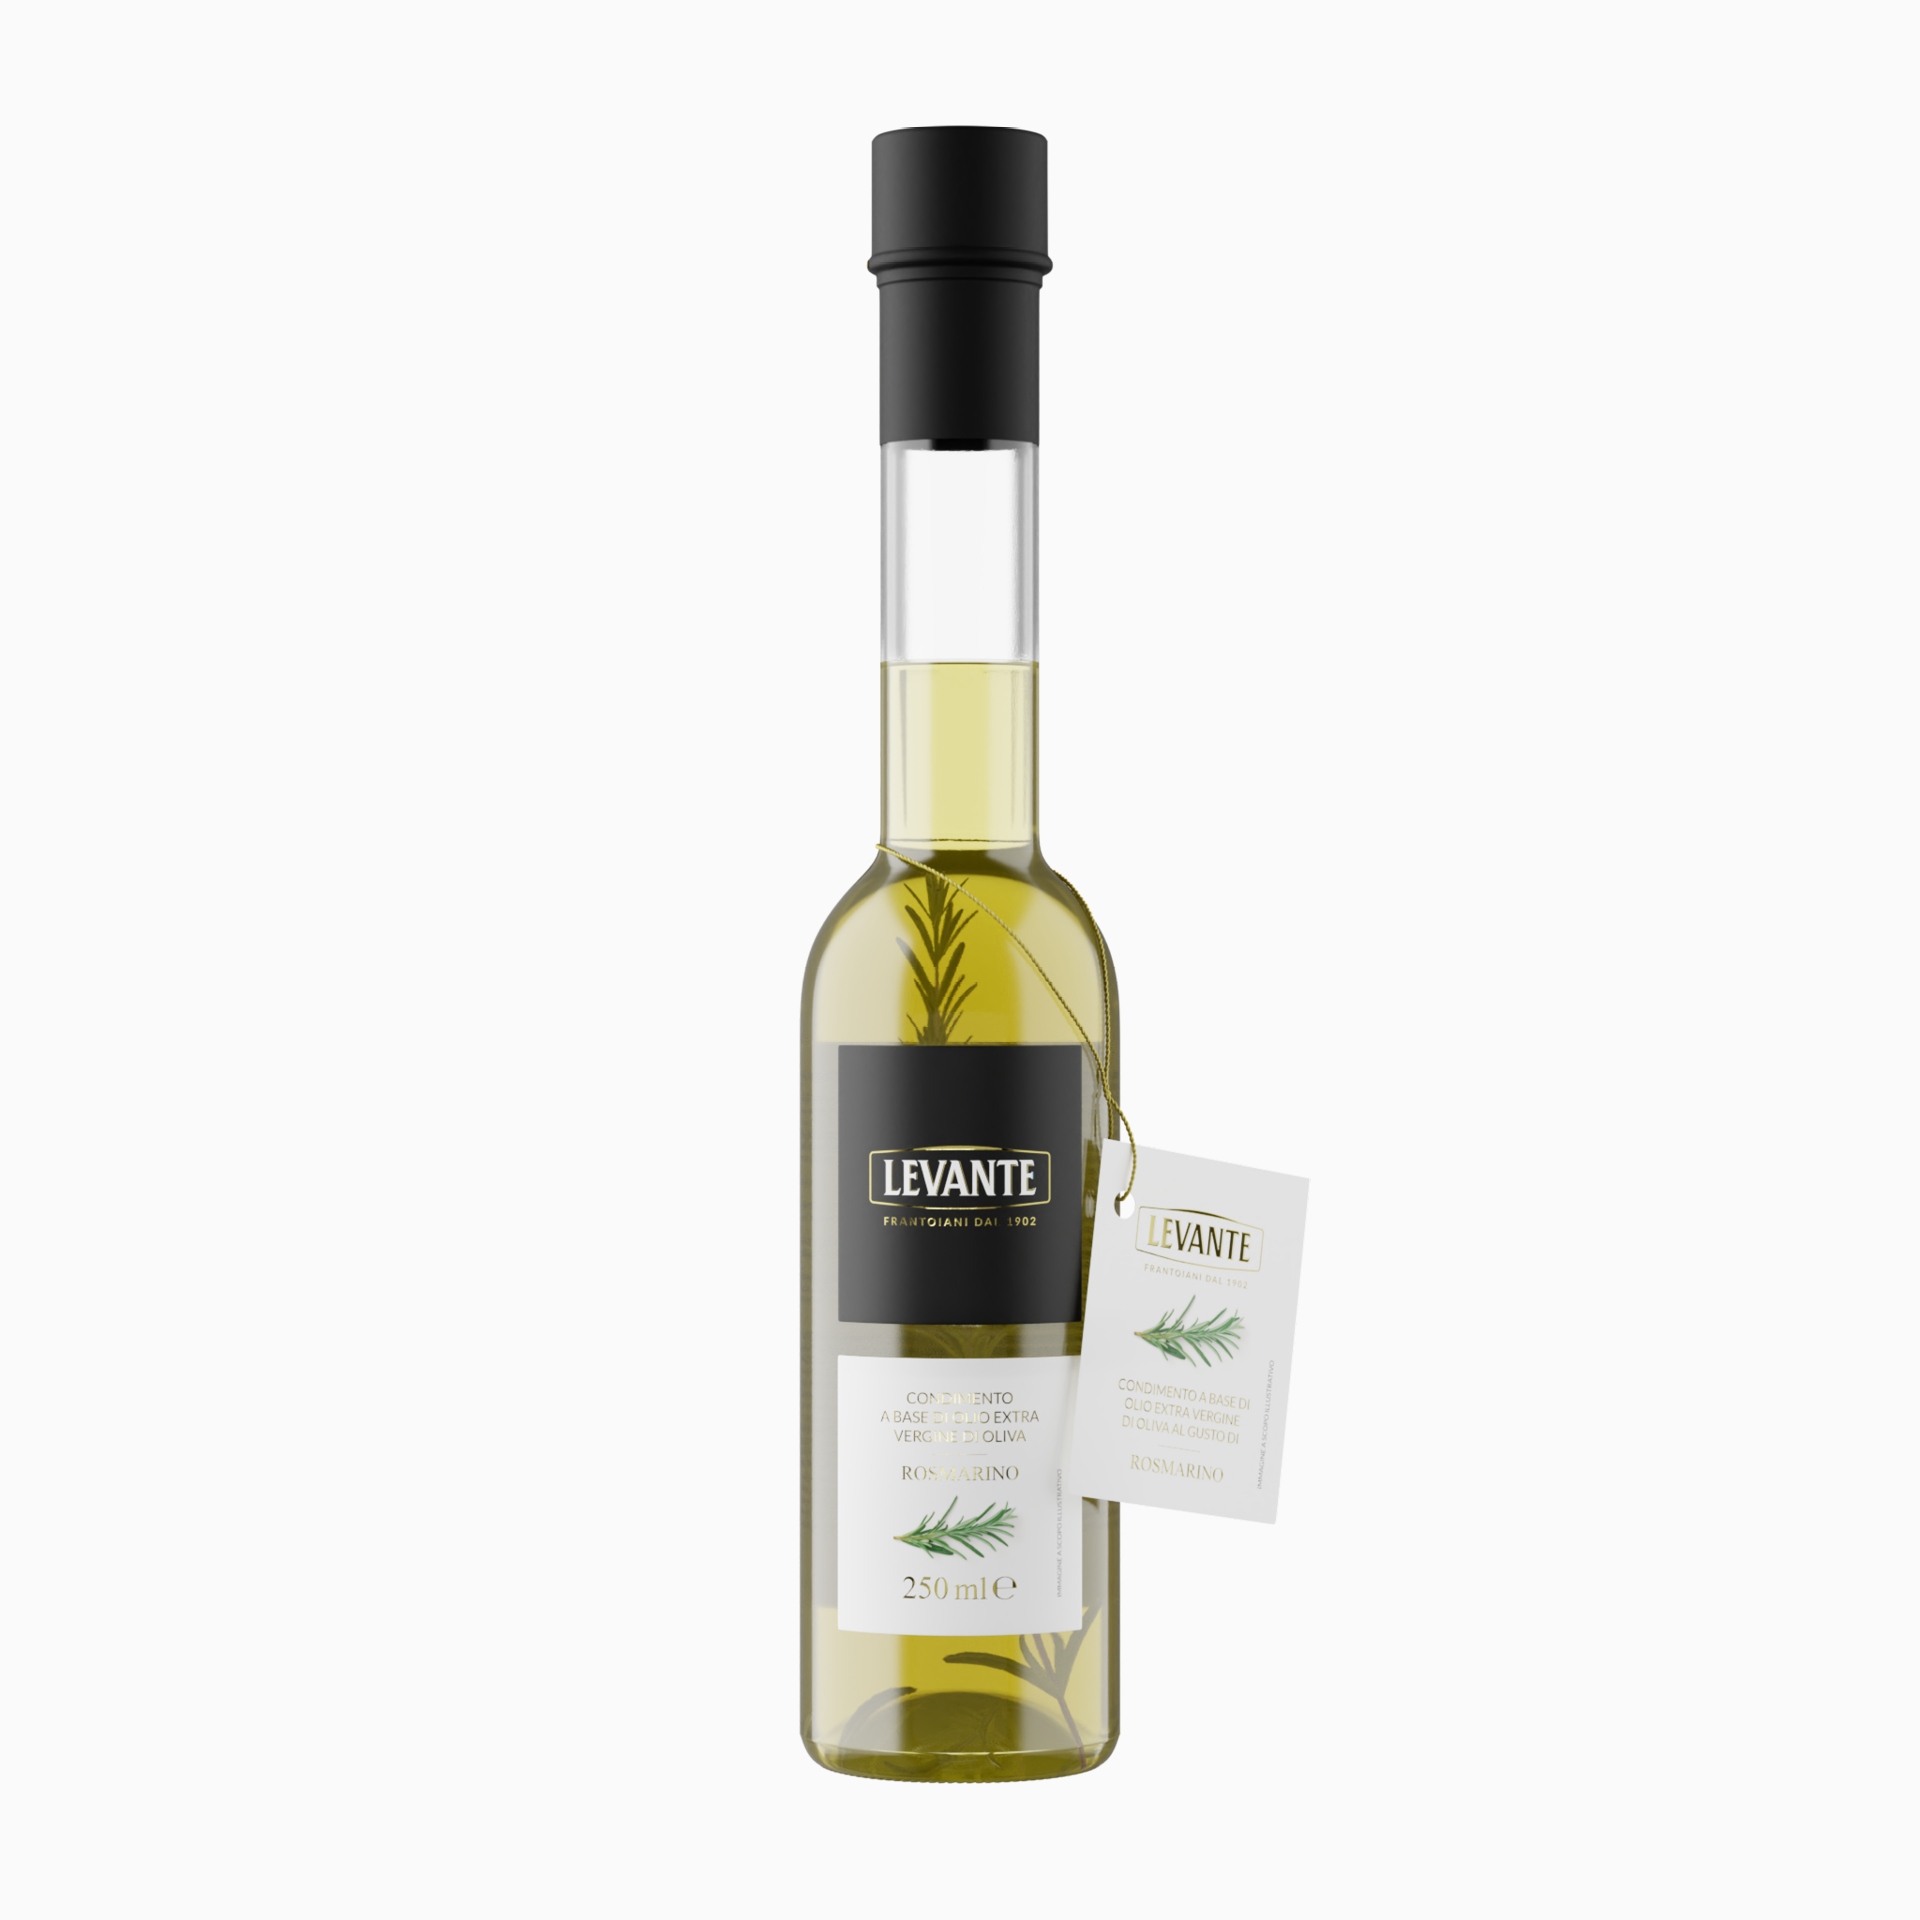 Extra Virgin Olive Oil flavoured with Rosmary